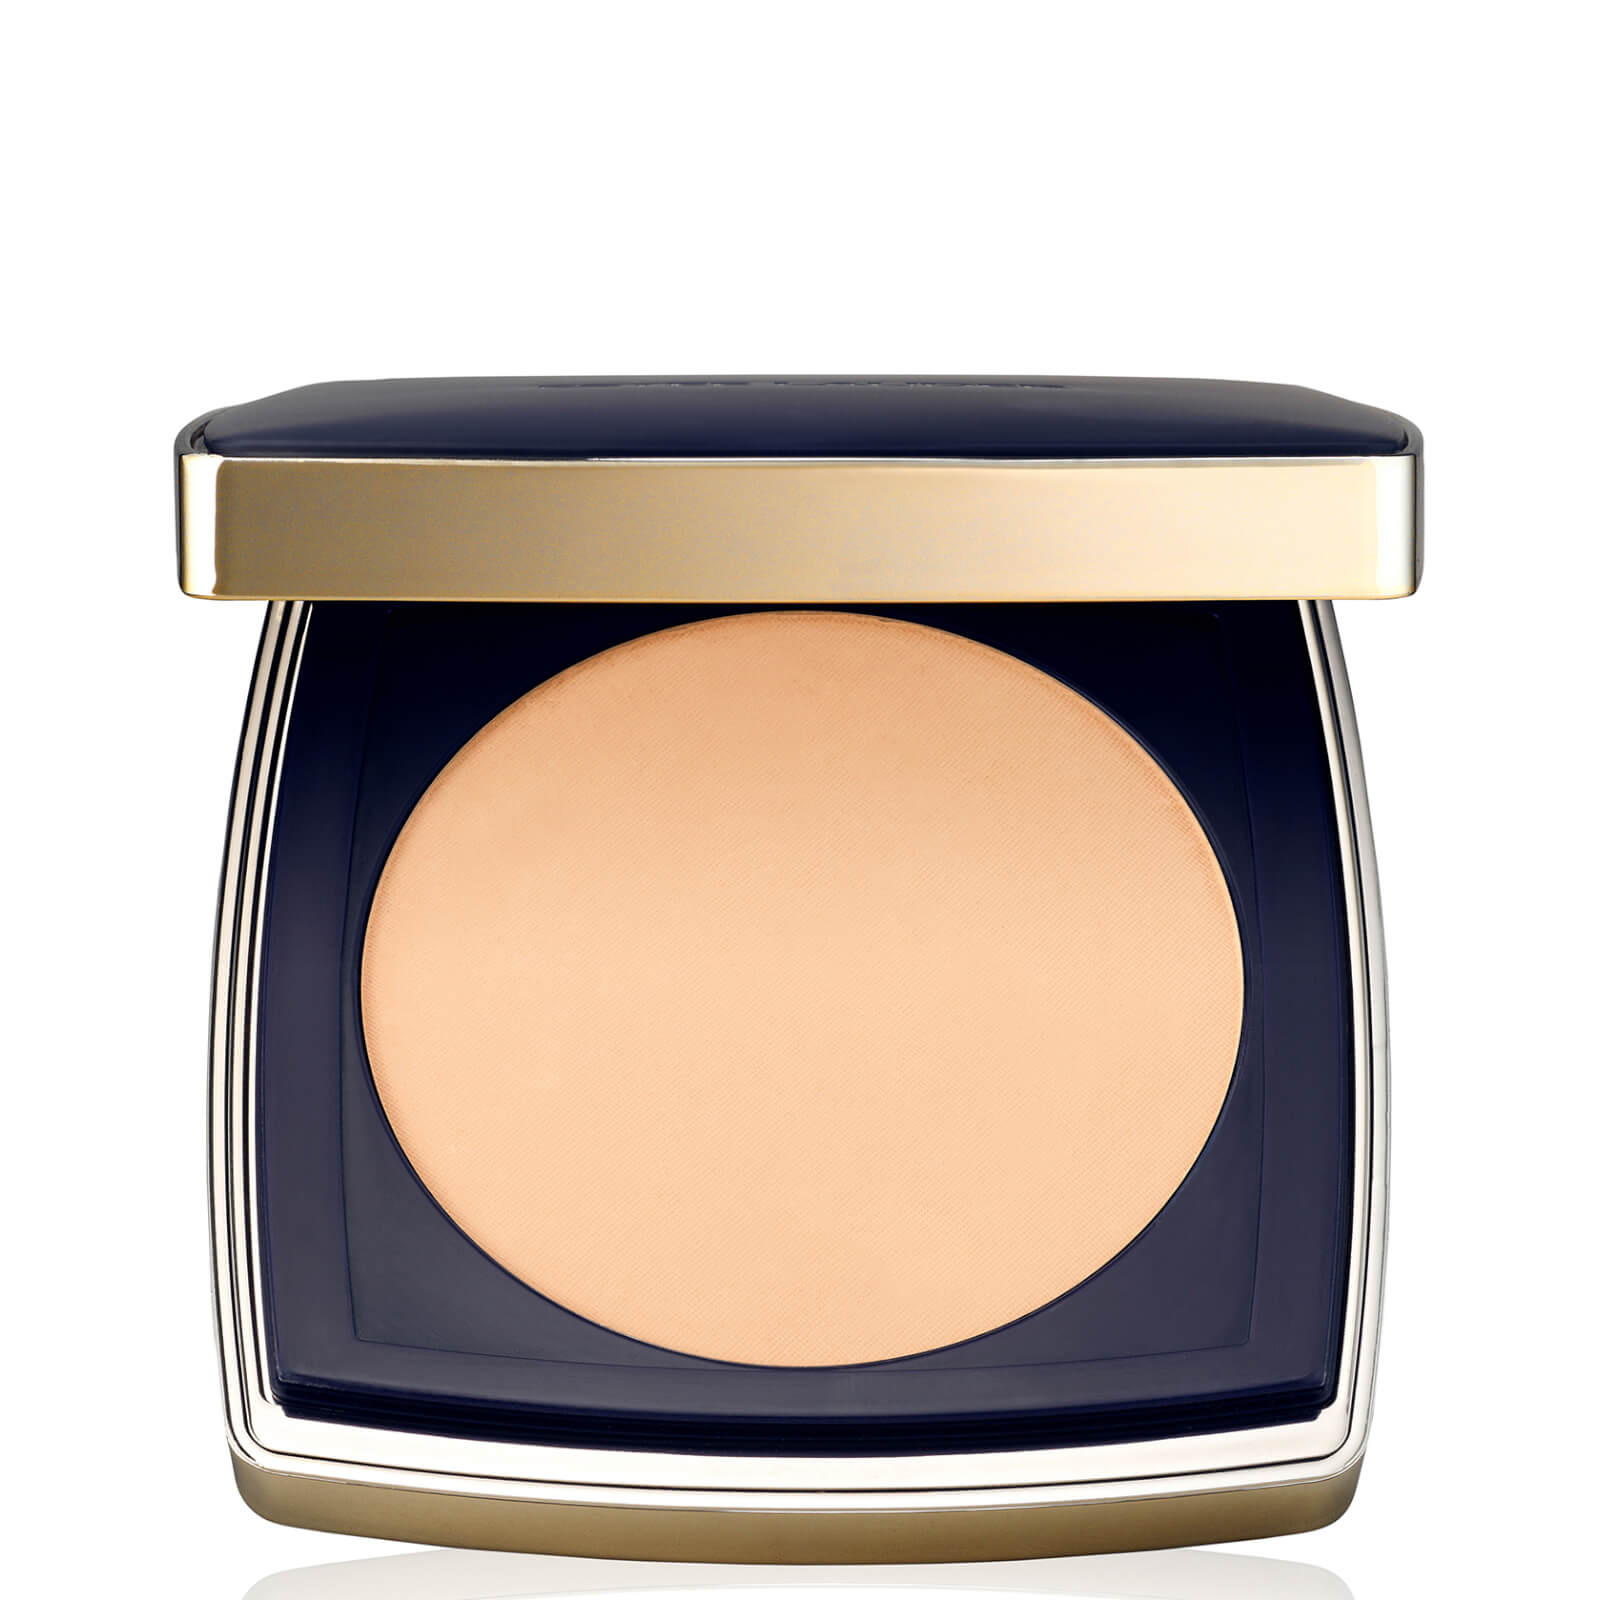 Estee Lauder Double Wear Stay-in-Place Matte Powder Foundation SPF10 12g (Various Shades) - 3N1 Ivor